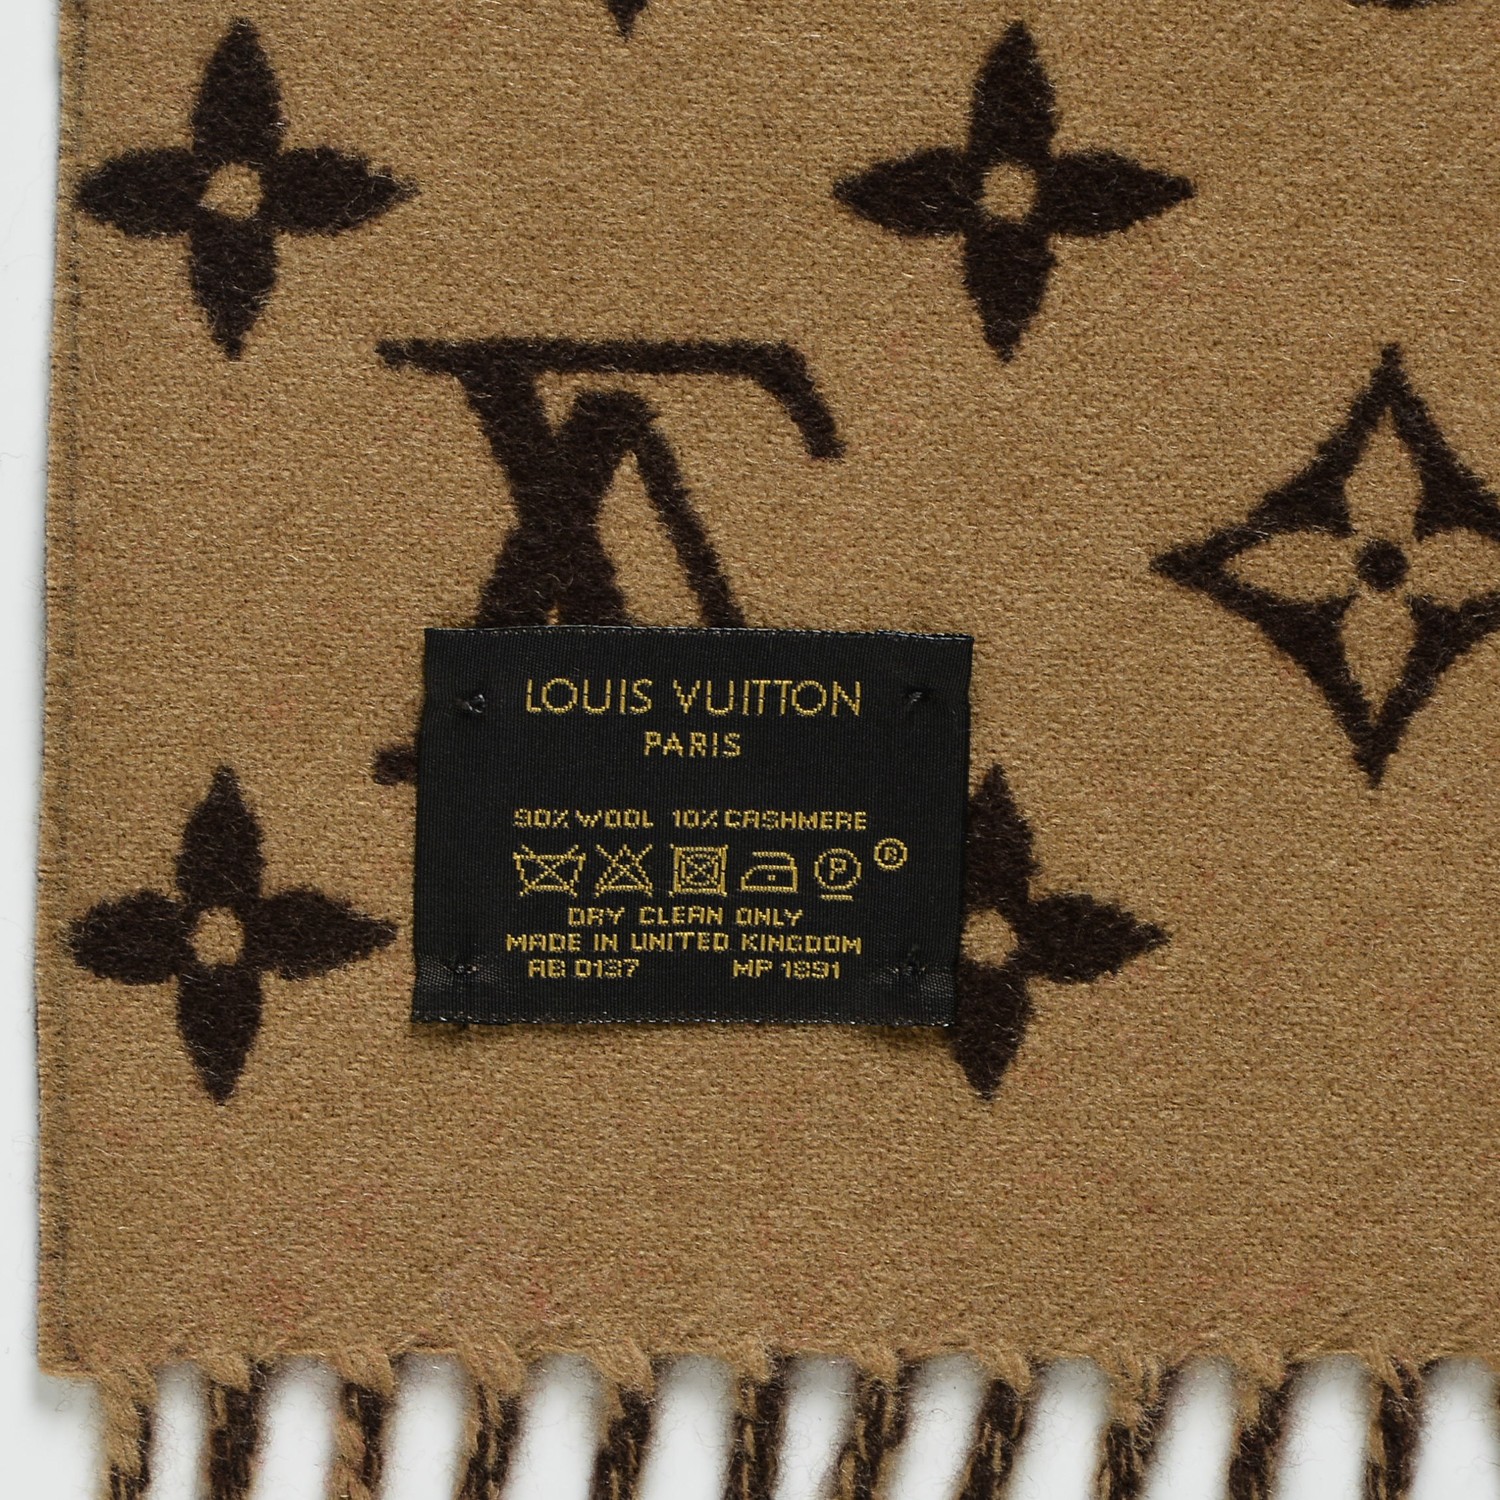 How To Tell If Your Louis Vuitton Scarf Is Real | Supreme HypeBeast Product